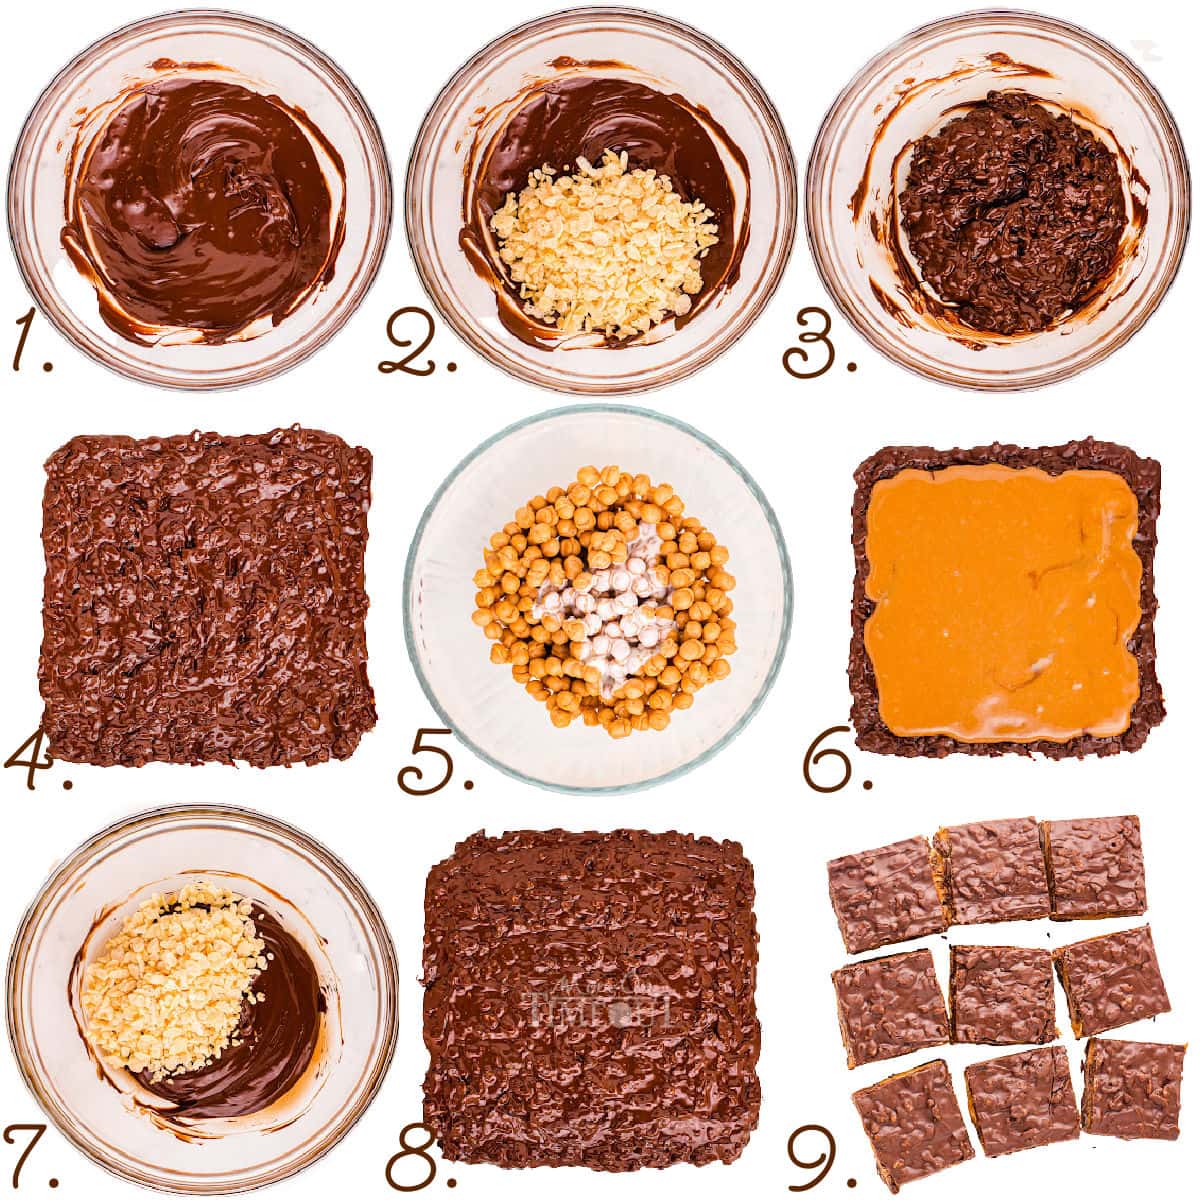 nine image collage showing step by step how to make this 100 grand bar recipe.